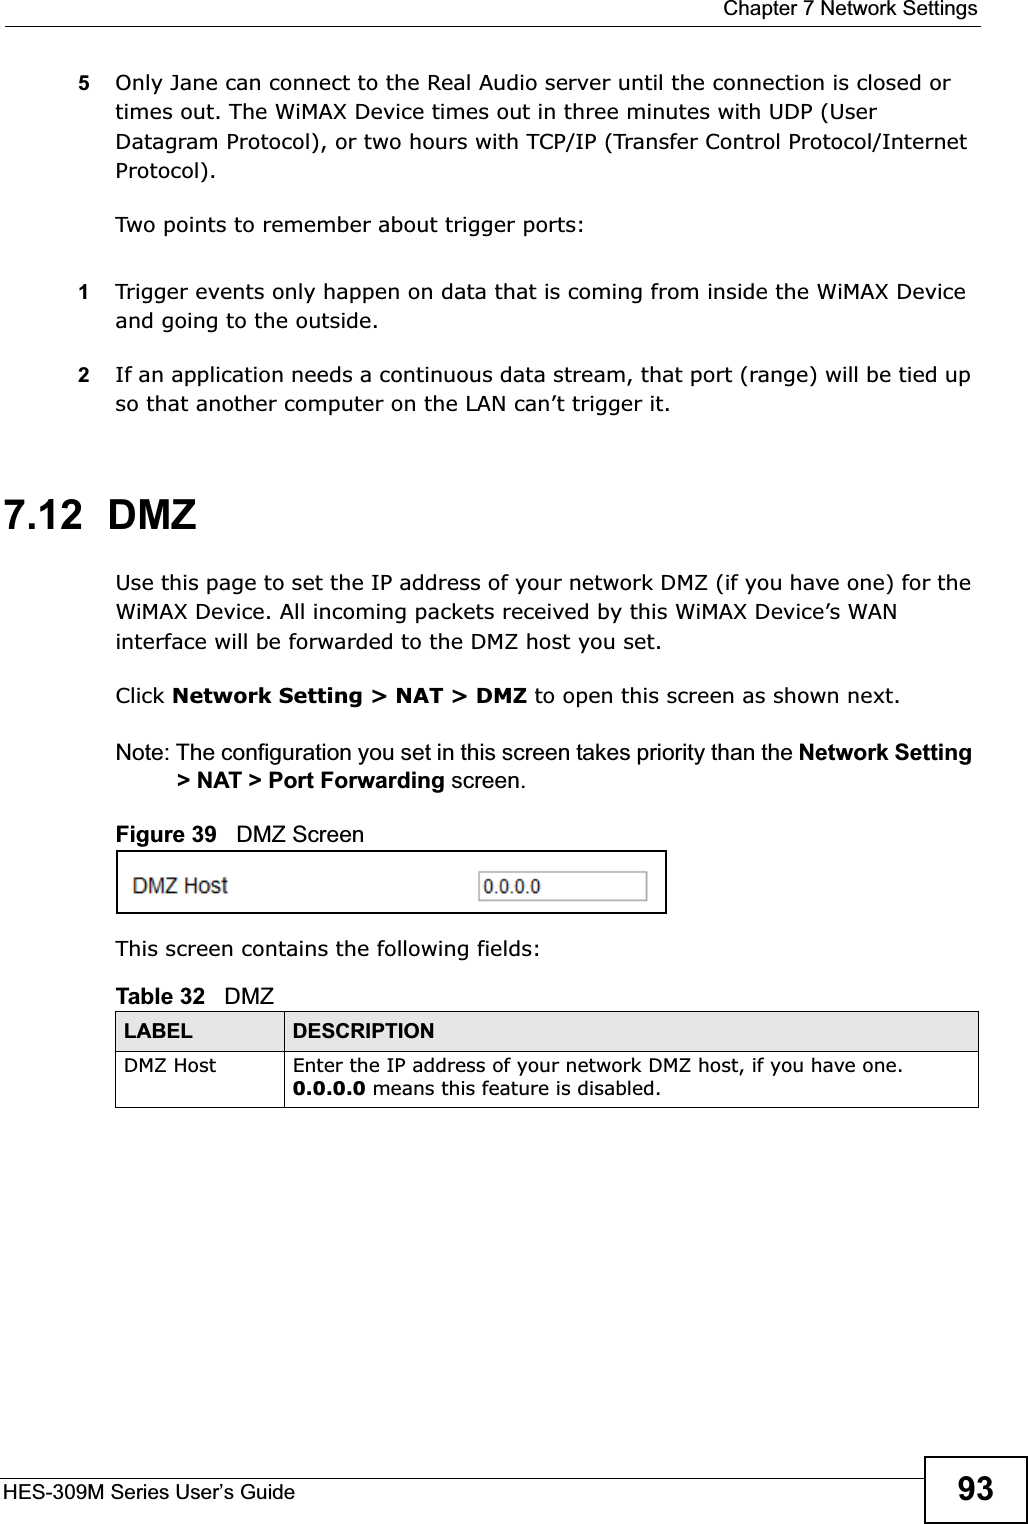  Chapter 7 Network SettingsHES-309M Series User’s Guide 935Only Jane can connect to the Real Audio server until the connection is closed or times out. The WiMAX Device times out in three minutes with UDP (User Datagram Protocol), or two hours with TCP/IP (Transfer Control Protocol/Internet Protocol). Two points to remember about trigger ports:1Trigger events only happen on data that is coming from inside the WiMAX Device and going to the outside.2If an application needs a continuous data stream, that port (range) will be tied up so that another computer on the LAN can’t trigger it. 7.12  DMZUse this page to set the IP address of your network DMZ (if you have one) for the WiMAX Device. All incoming packets received by this WiMAX Device’s WAN interface will be forwarded to the DMZ host you set.Click Network Setting &gt; NAT &gt; DMZ to open this screen as shown next.Note: The configuration you set in this screen takes priority than the Network Setting &gt; NAT &gt; Port Forwarding screen.Figure 39   DMZ ScreenThis screen contains the following fields:Table 32   DMZLABEL DESCRIPTIONDMZ Host Enter the IP address of your network DMZ host, if you have one. 0.0.0.0 means this feature is disabled.